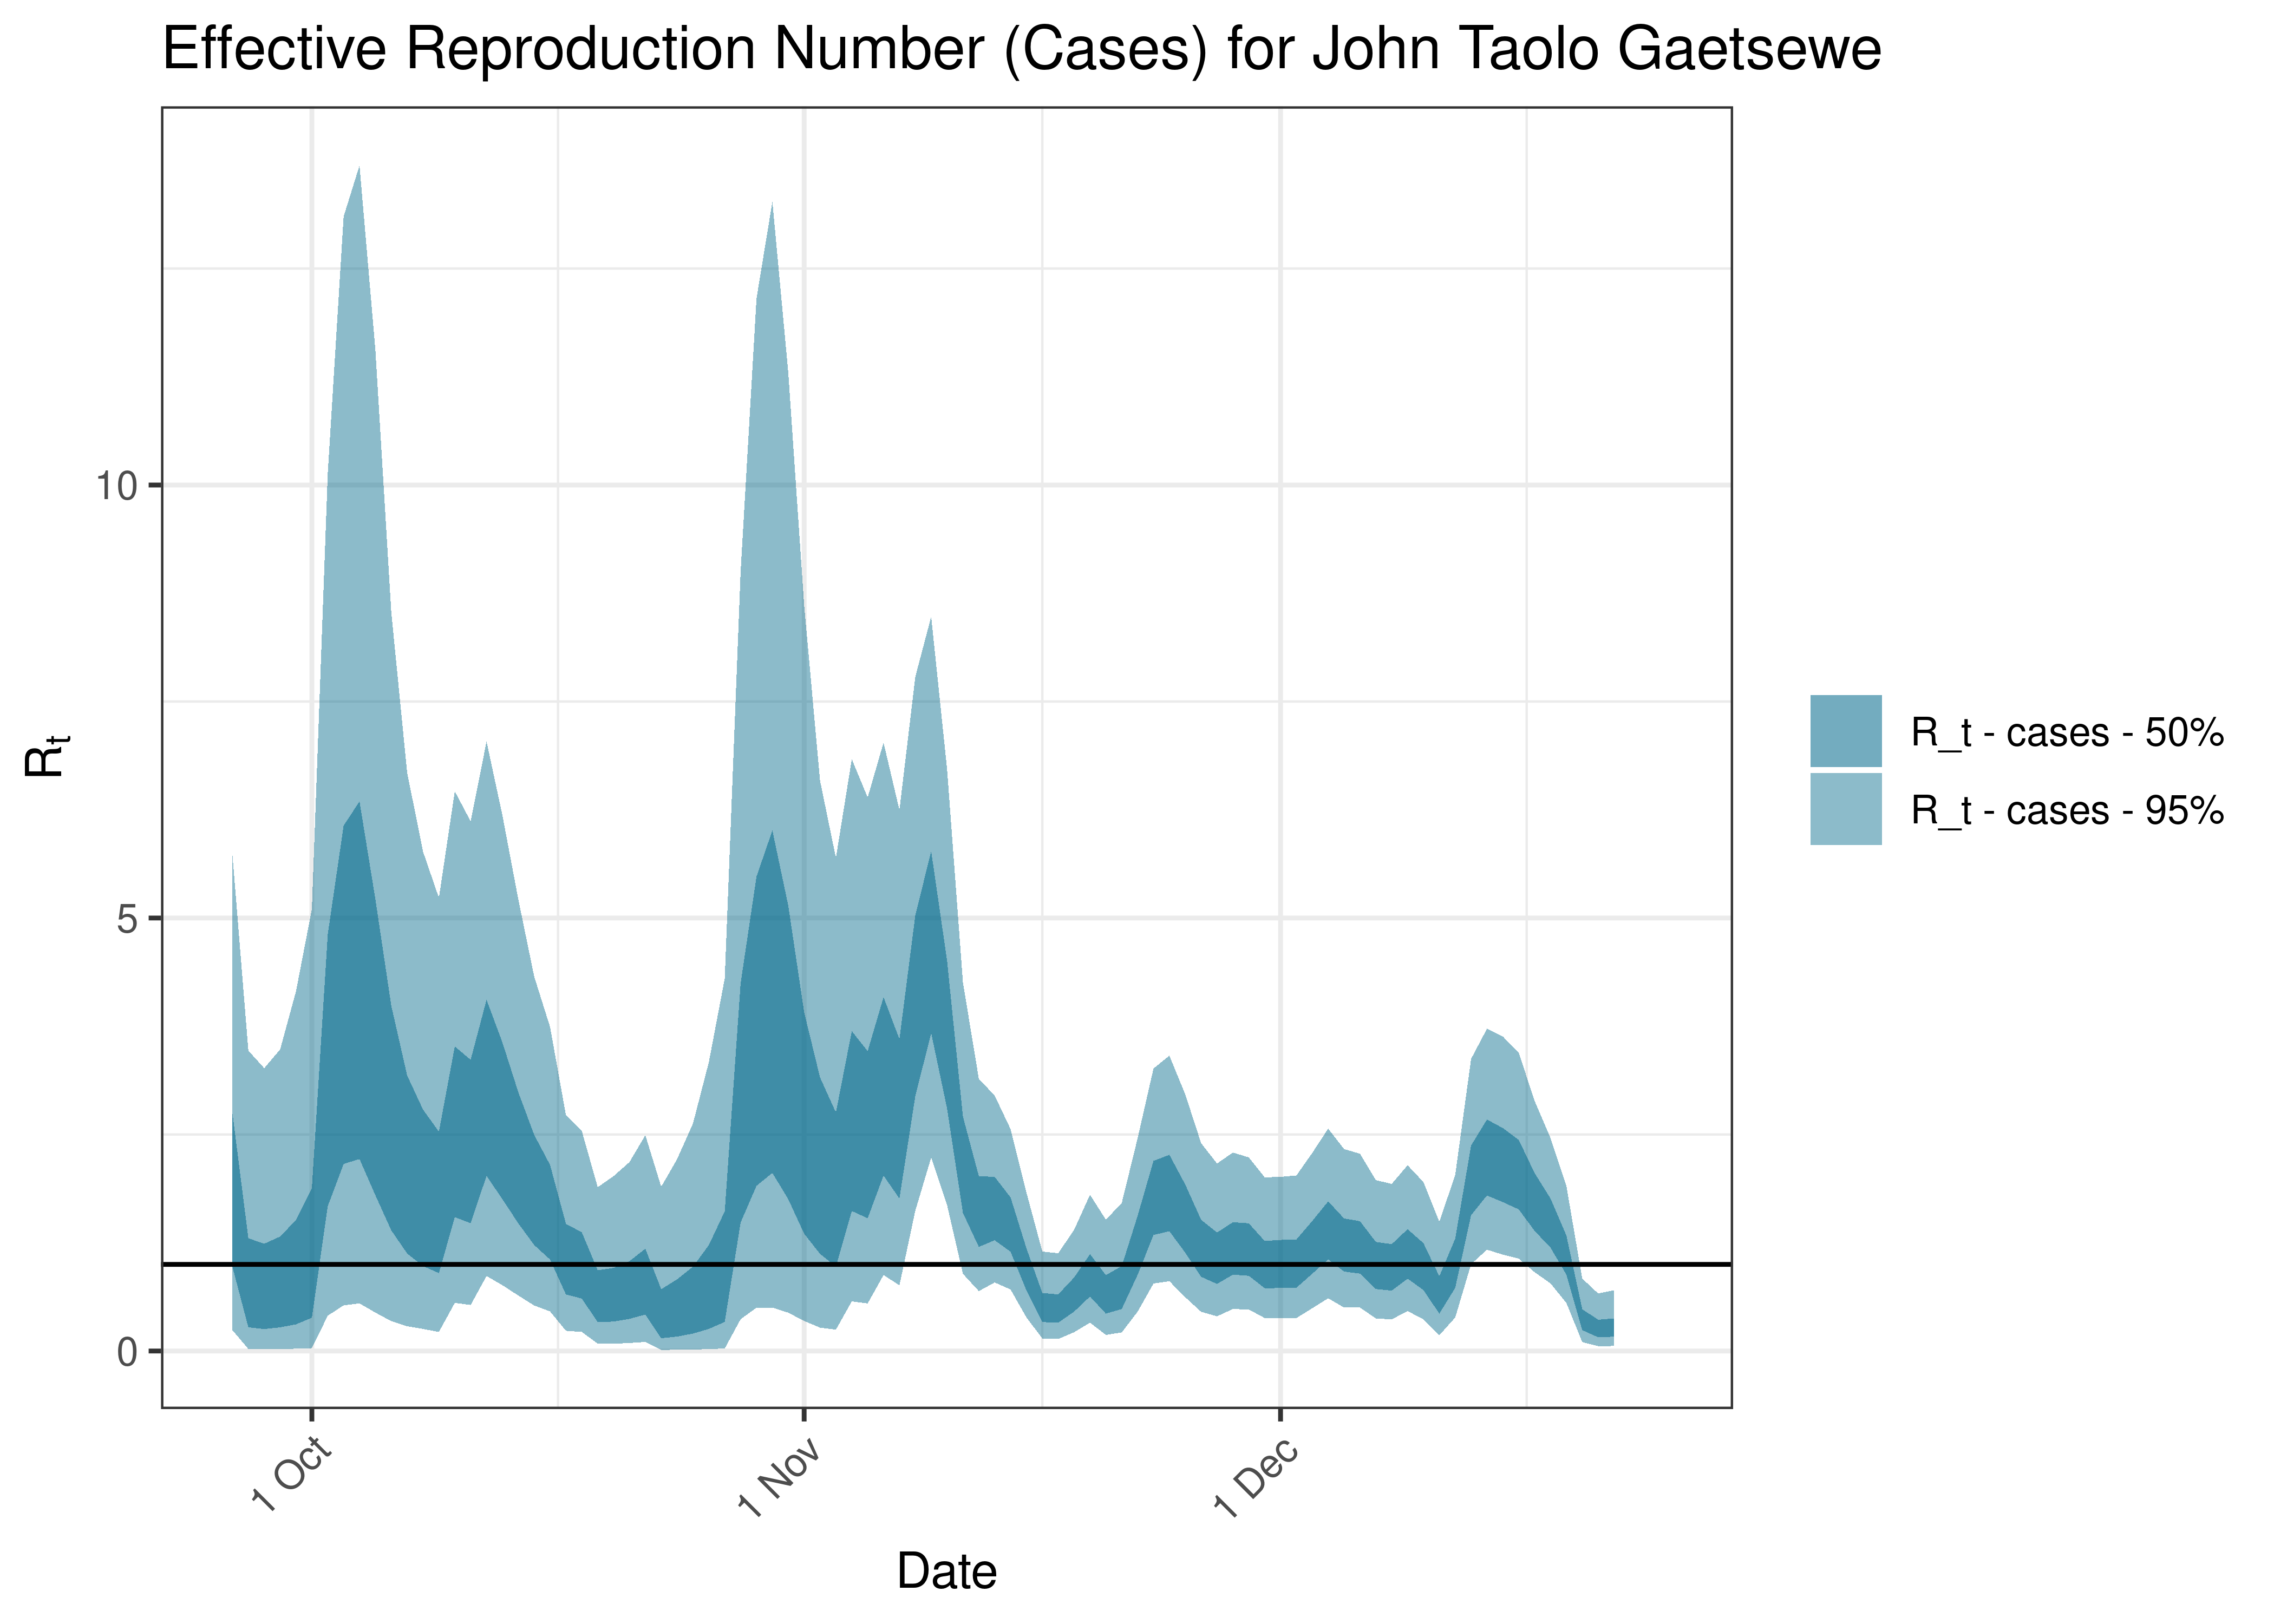 Estimated Effective Reproduction Number Based on Cases for John Taolo Gaetsewe over last 90 days